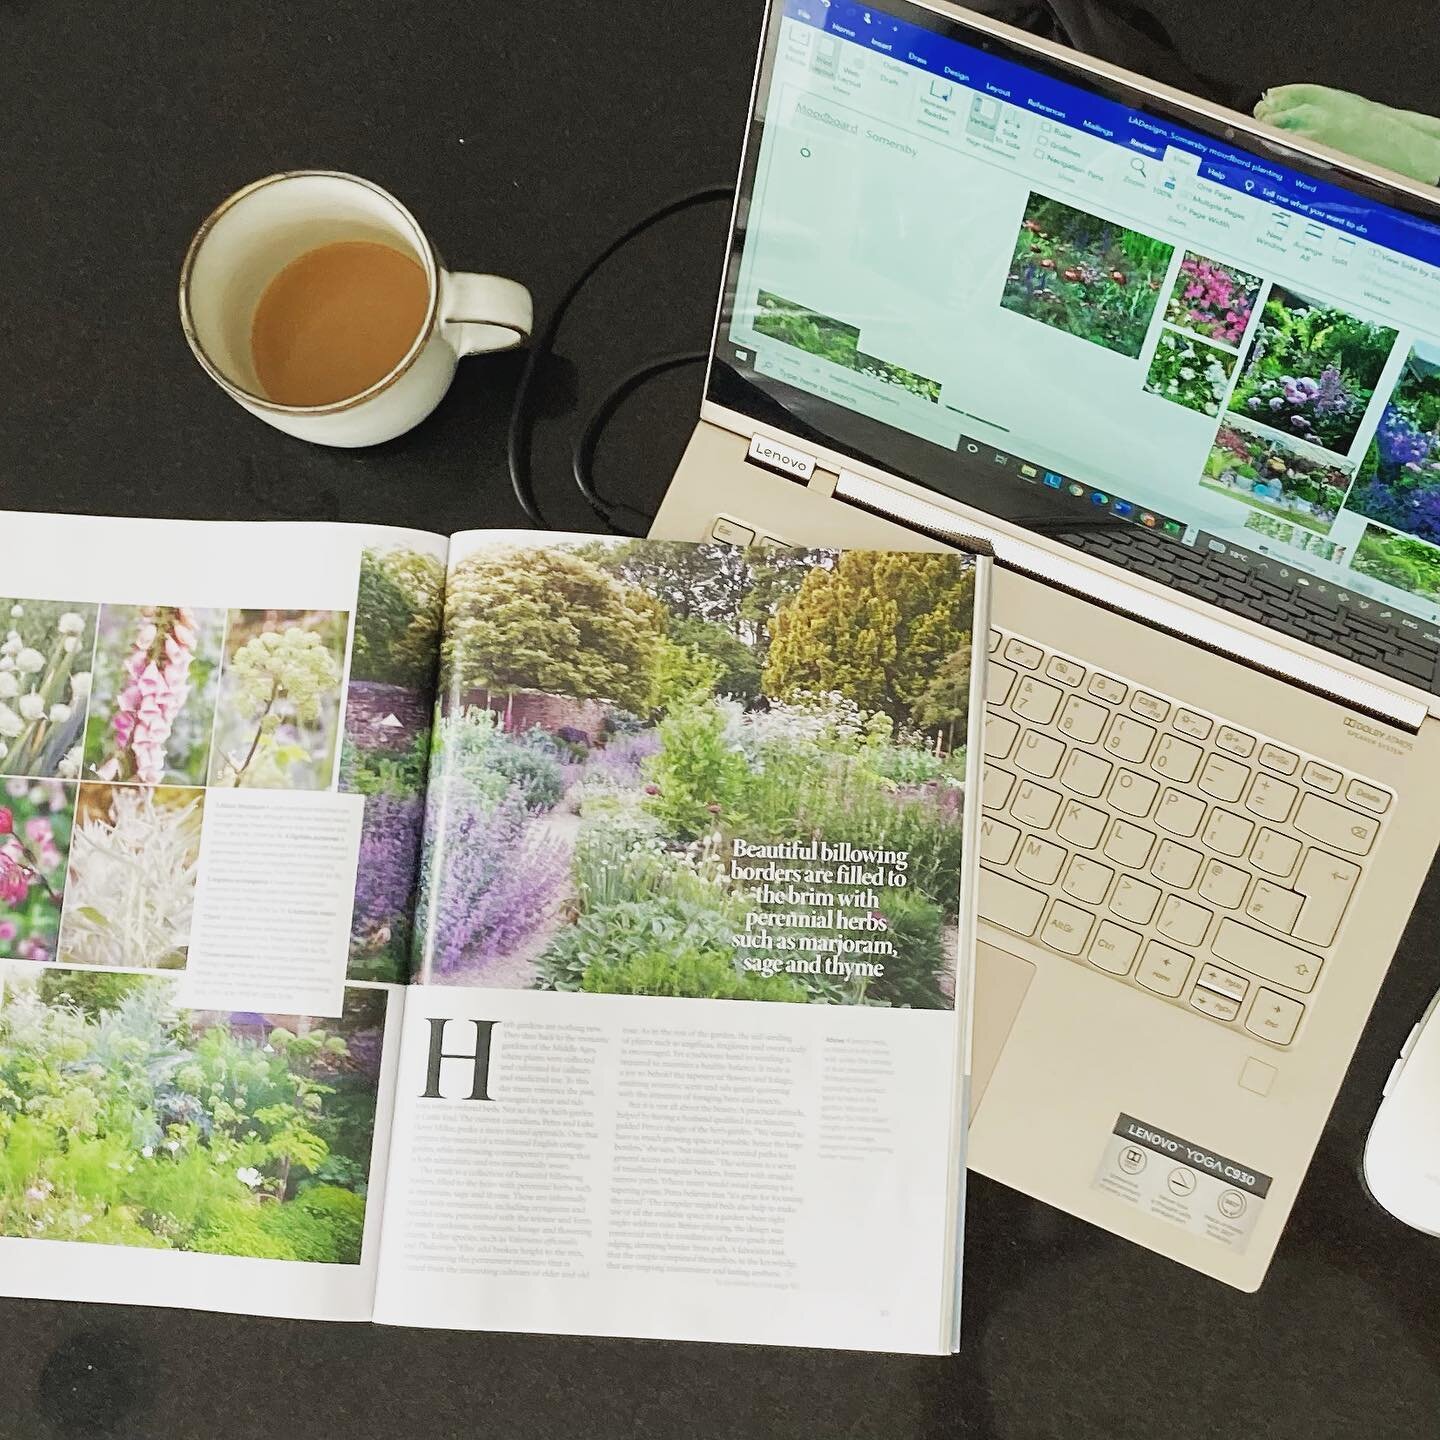 Researching plants and creating mood boards for new clients! 

If you&rsquo;re unsure of what to do with your garden and are in need of some help, come down to De&rsquo;laniey&rsquo;s re-launch party in Oxton village this weekend - I&rsquo;ll be ther